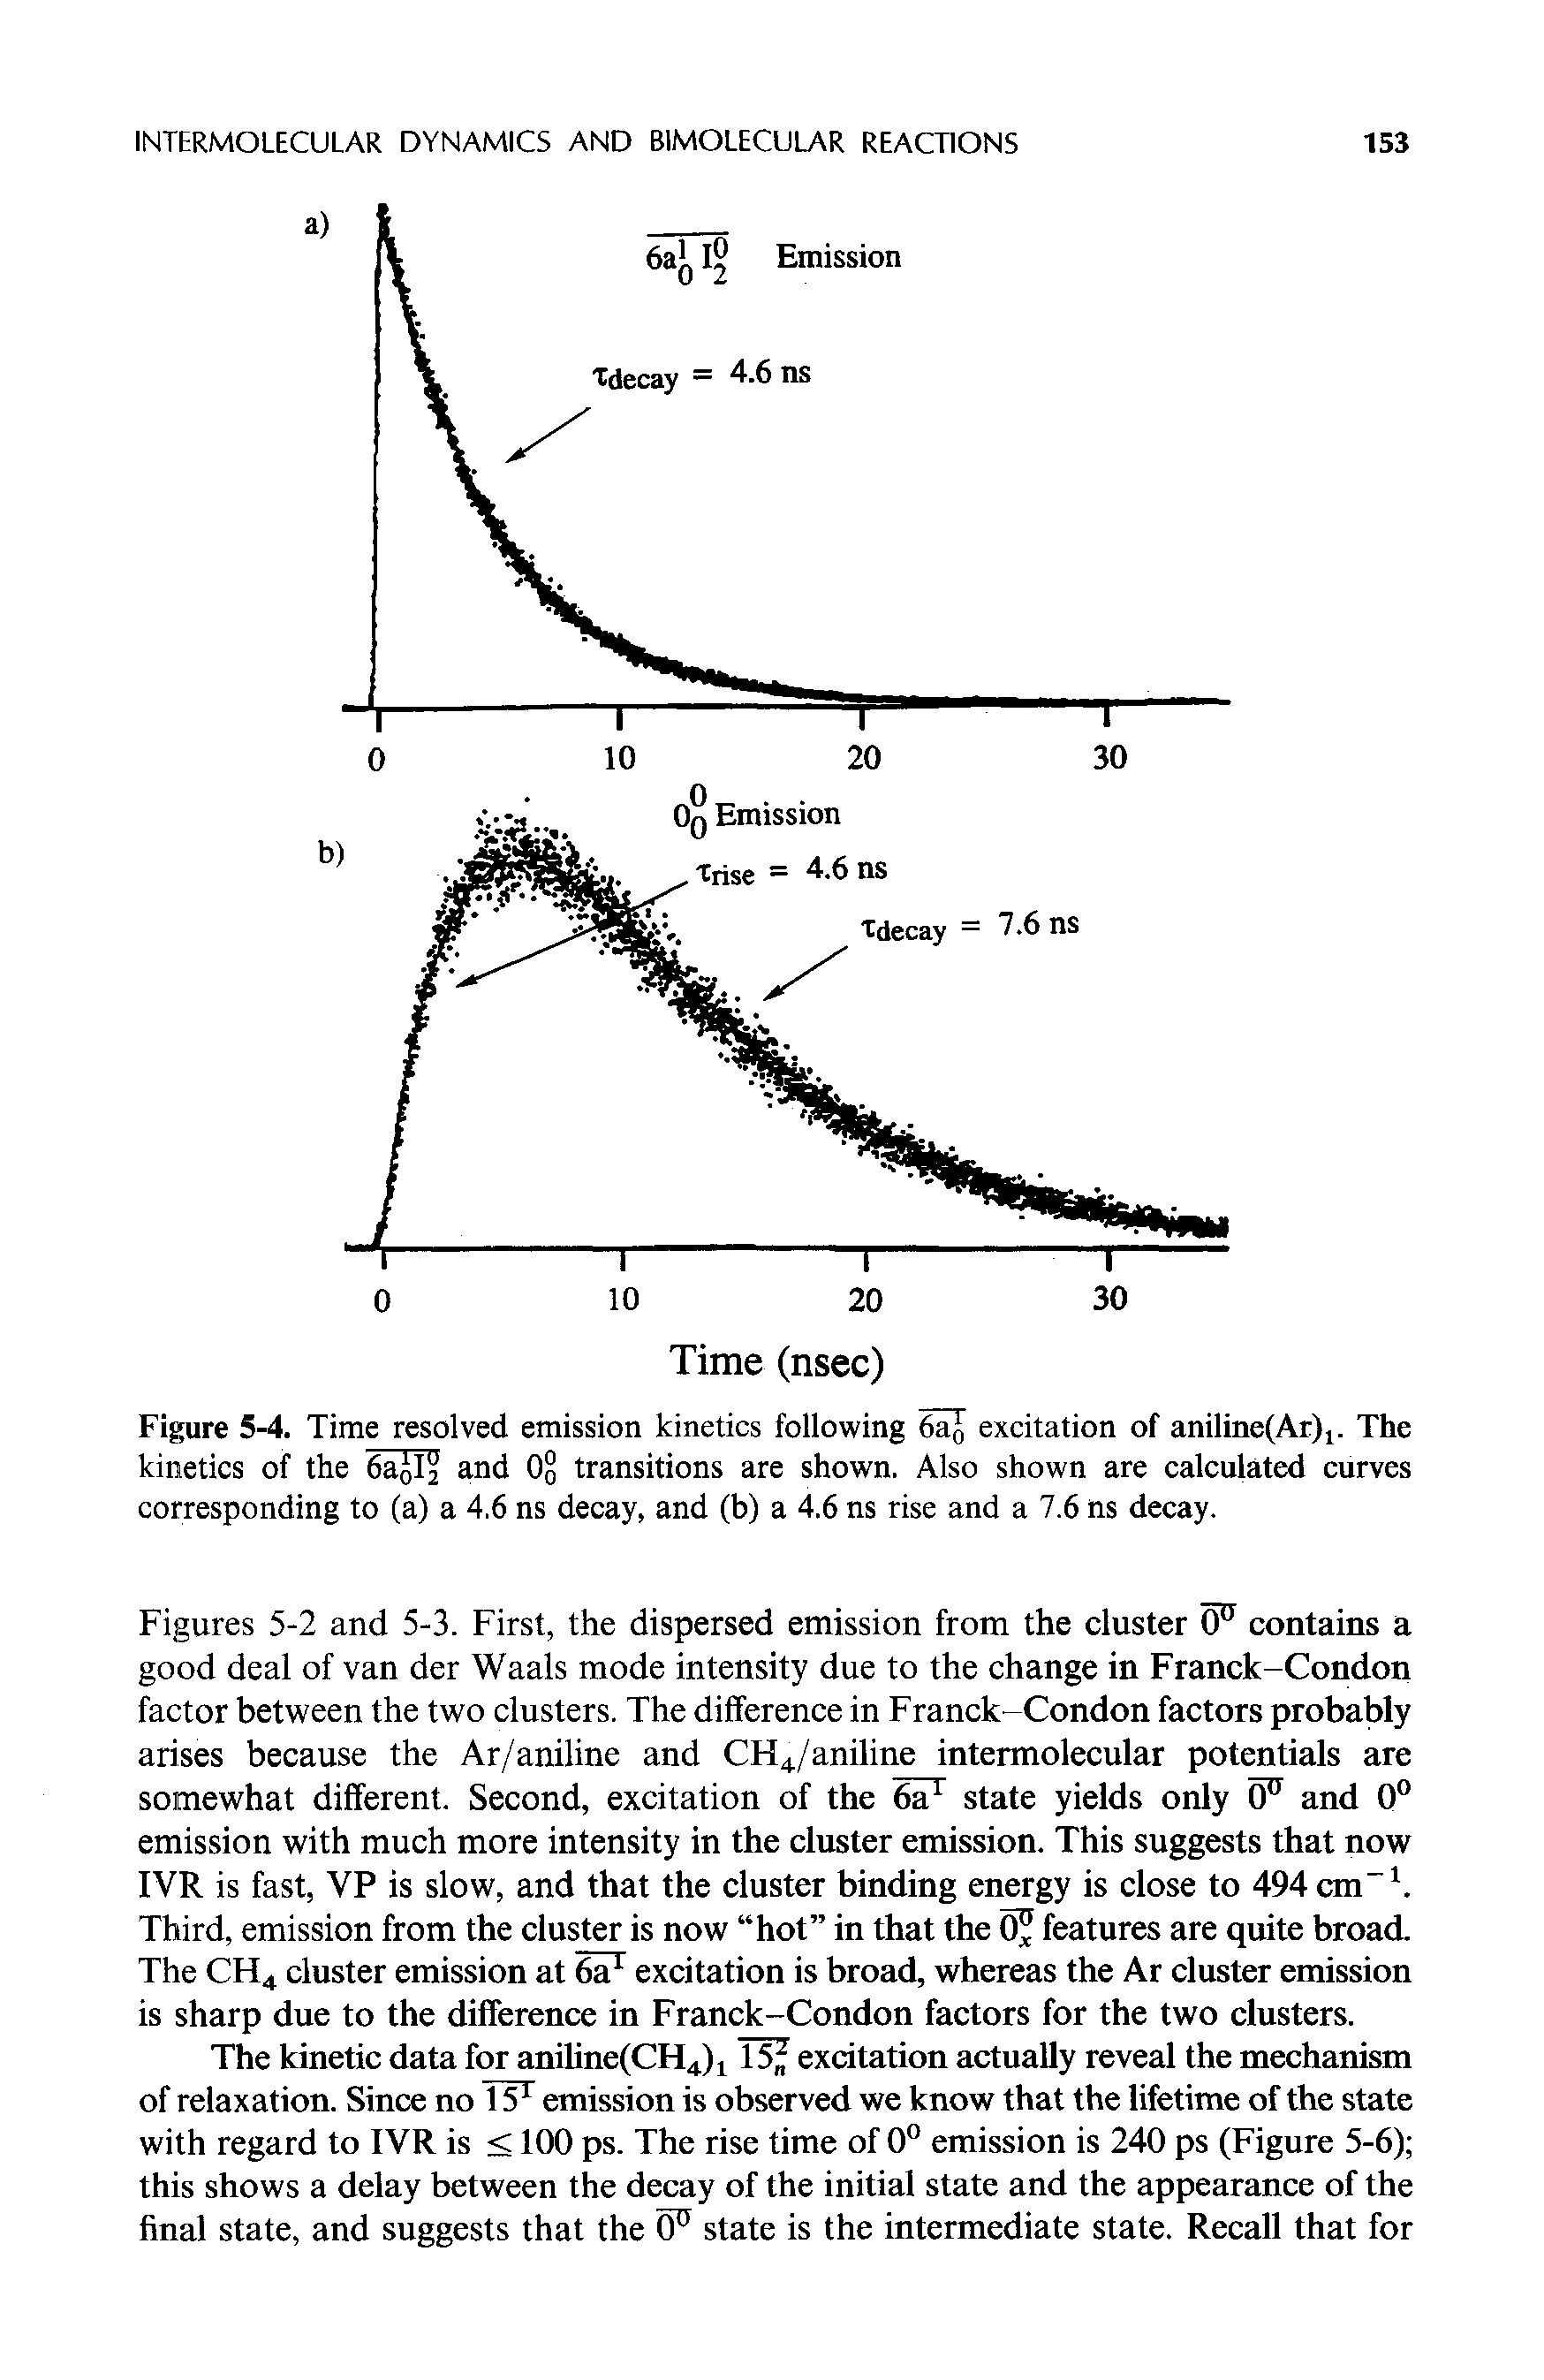 Figures 5-2 and 5-3. First, the dispersed emission from the cluster <F contains a good deal of van der Waals mode intensity due to the change in Franck-Condon factor between the two clusters. The difference in Franck-Condon factors probably arises because the Ar/aniline and CFJ4/aniline intermolecular potentials are somewhat different. Second, excitation of the 6a1 state yields only (F and 0° emission with much more intensity in the cluster emission. This suggests that now IVR is fast, VP is slow, and that the cluster binding energy is close to 494 cm-1. Third, emission from the cluster is now hot in that the 0 features are quite broad. The CH4 cluster emission at 6a1 excitation is broad, whereas the Ar cluster emission is sharp due to the difference in Franck-Condon factors for the two clusters.